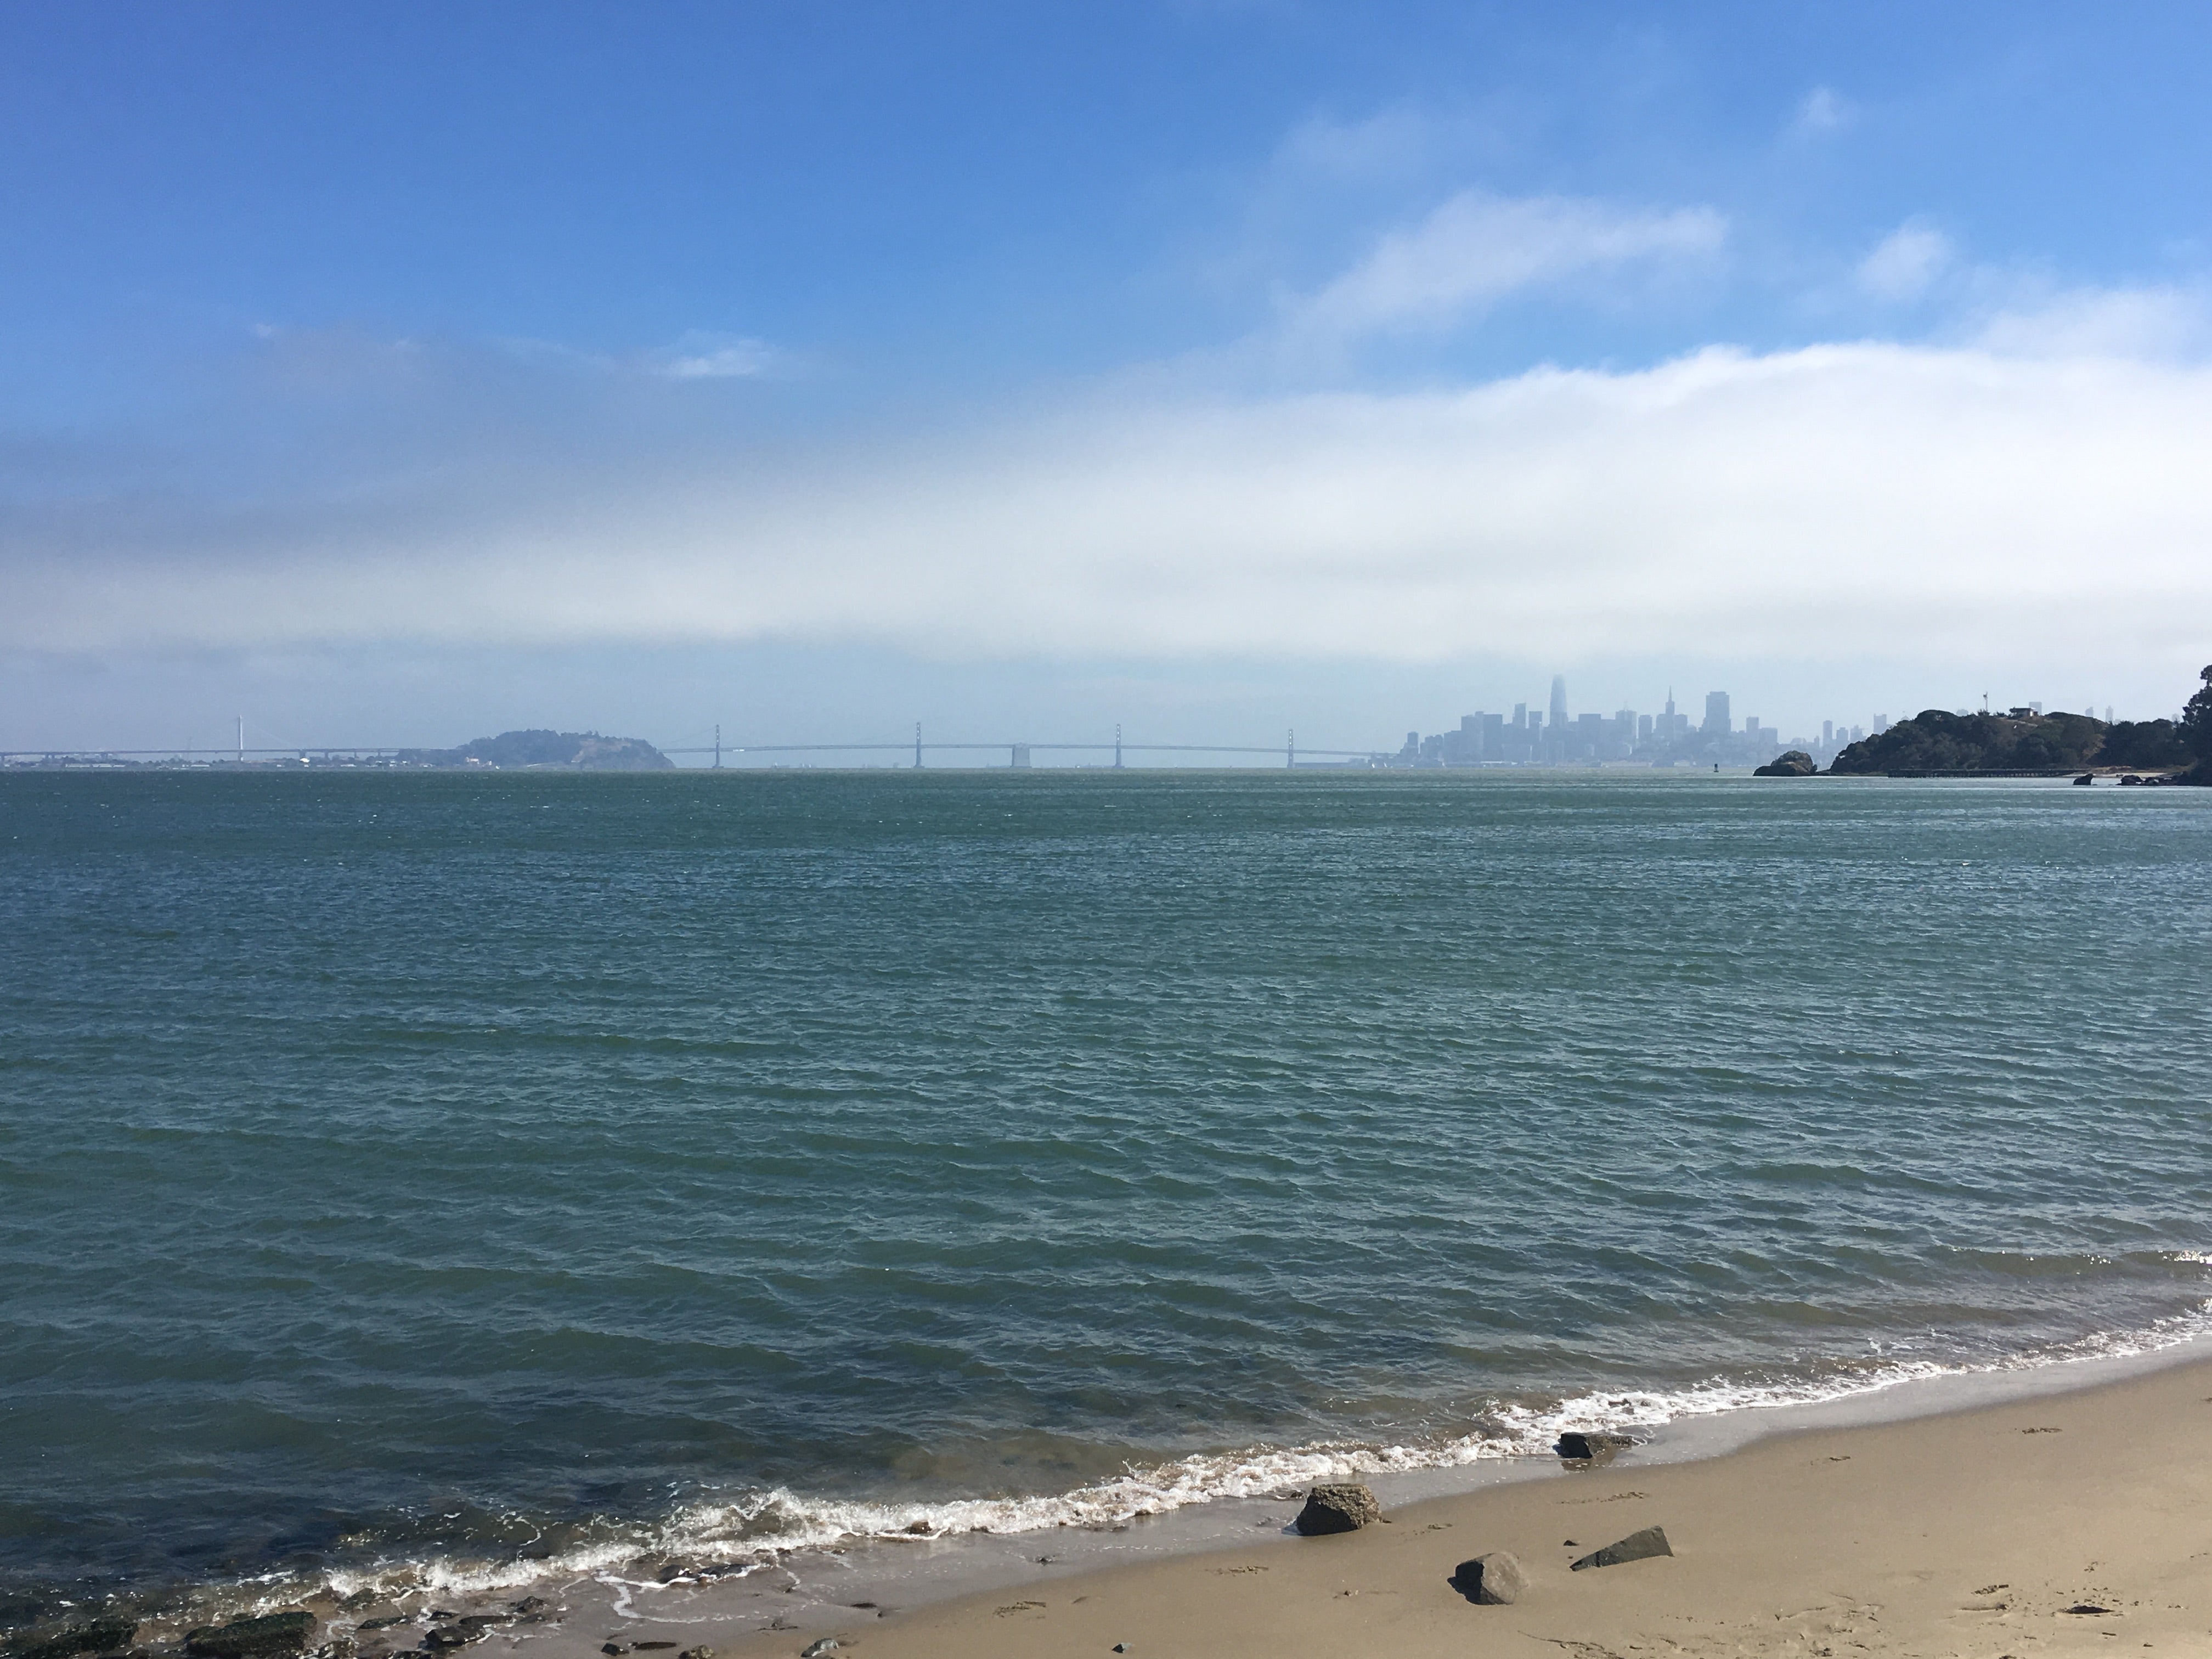 Views of San Francisco from the beach.